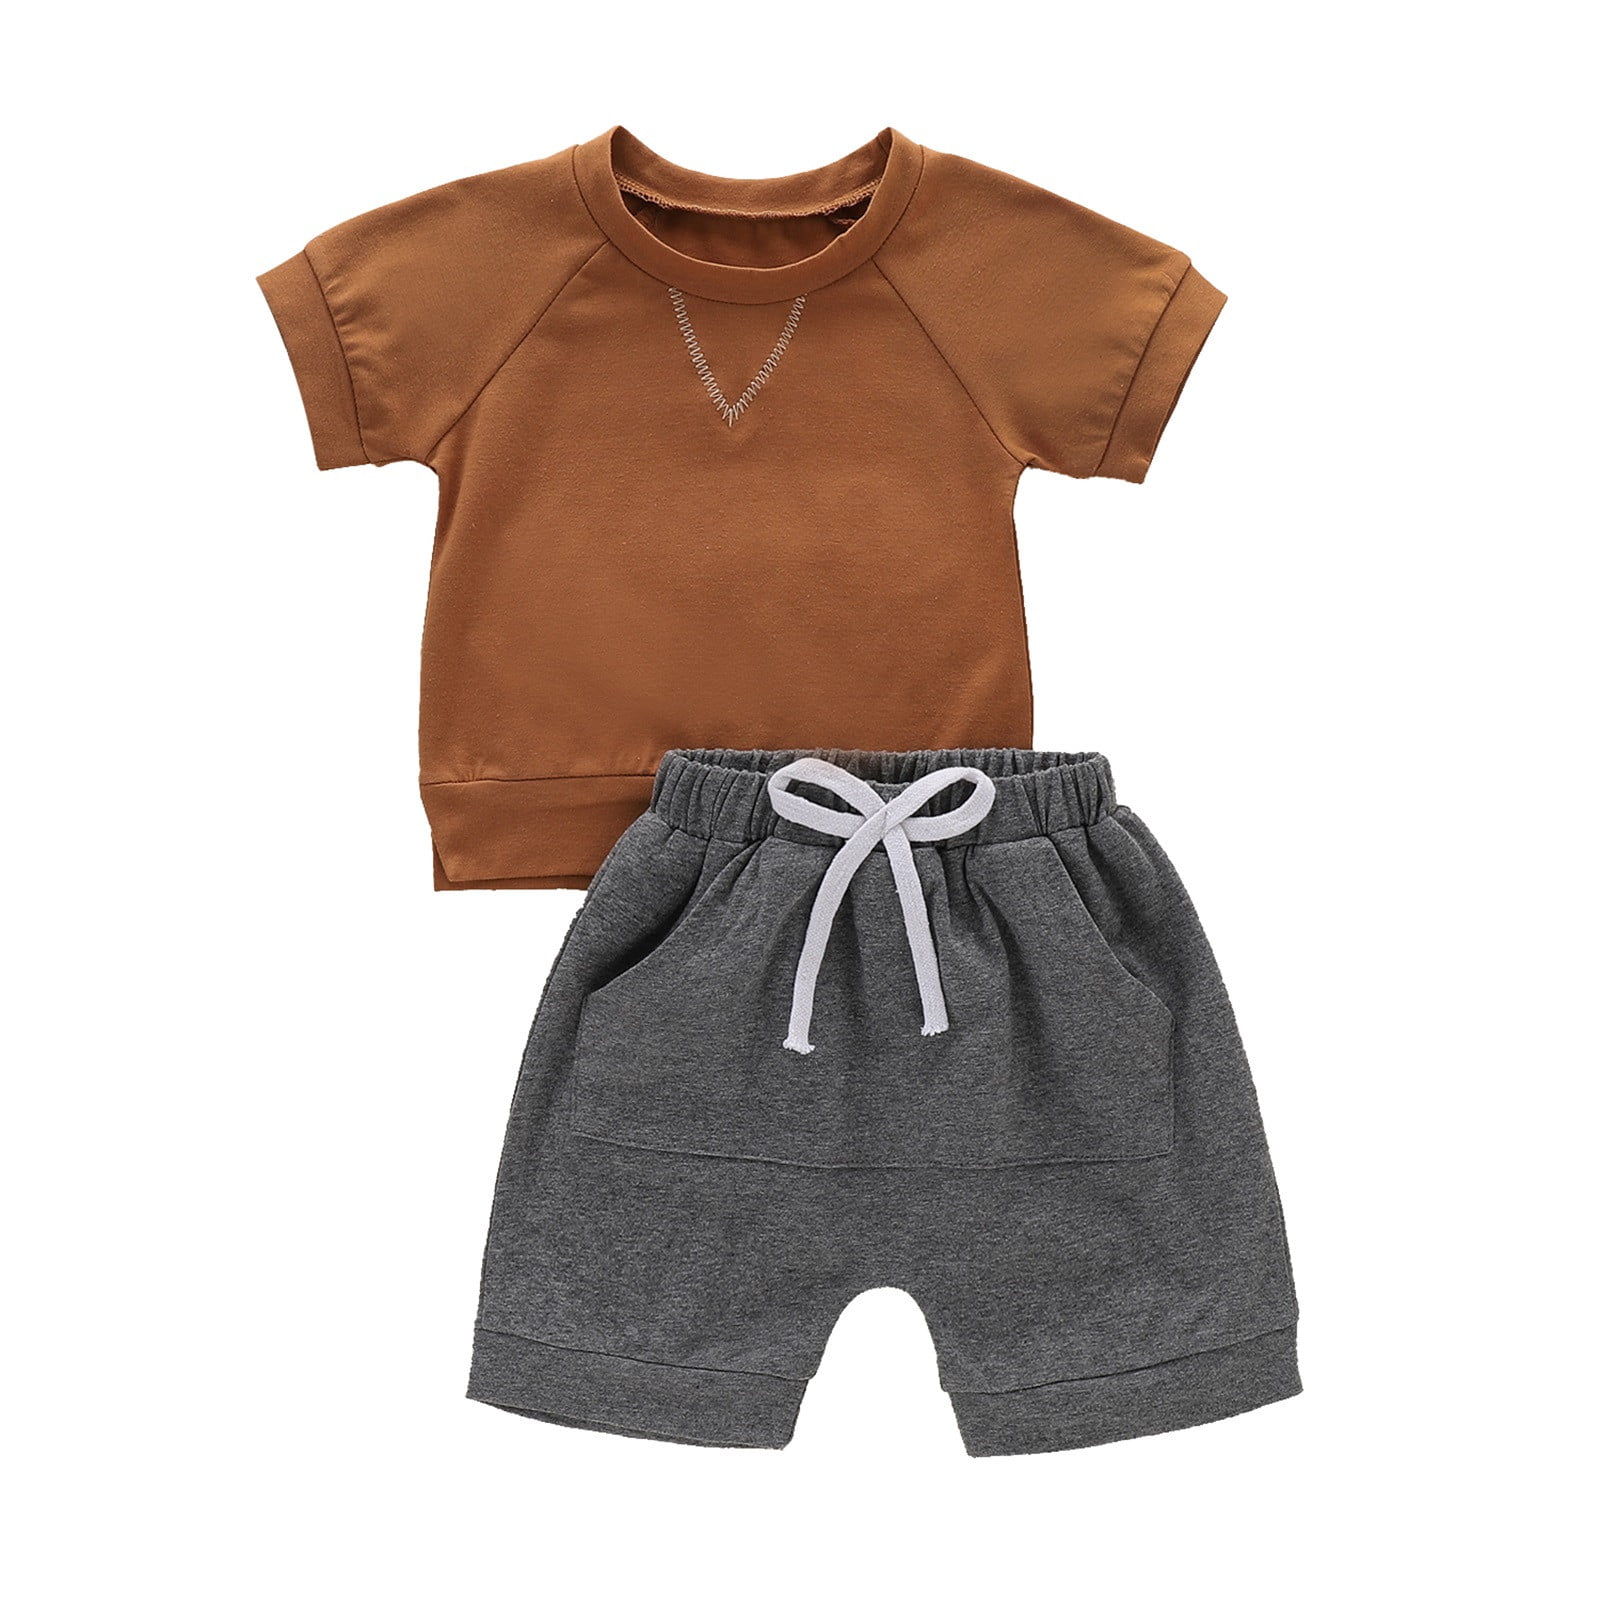 REORIAFEE Newborn Baby Boy Clothes Western Coming Home Outfit 90s Themed  Party Outfits Toddler Kids Baby Boy Summer Casual Brown Short Sleeve Shorts  Clothes Set Brown 90 